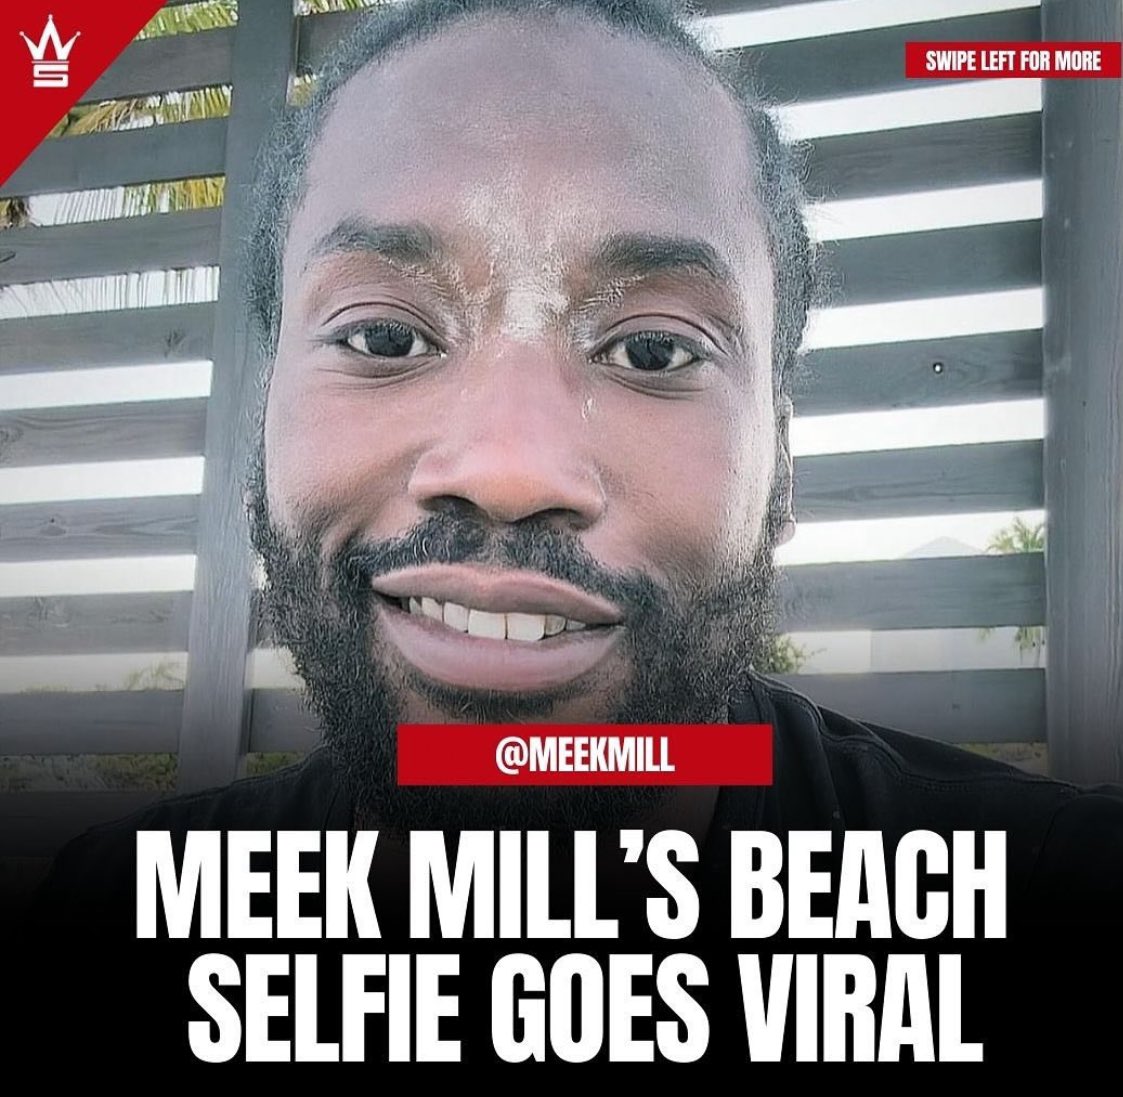 Oh man…. come on Meek that’s not a good look right now……

SMH….. 

Next level Humiliation Ritual right here…

#WeWantAnswers